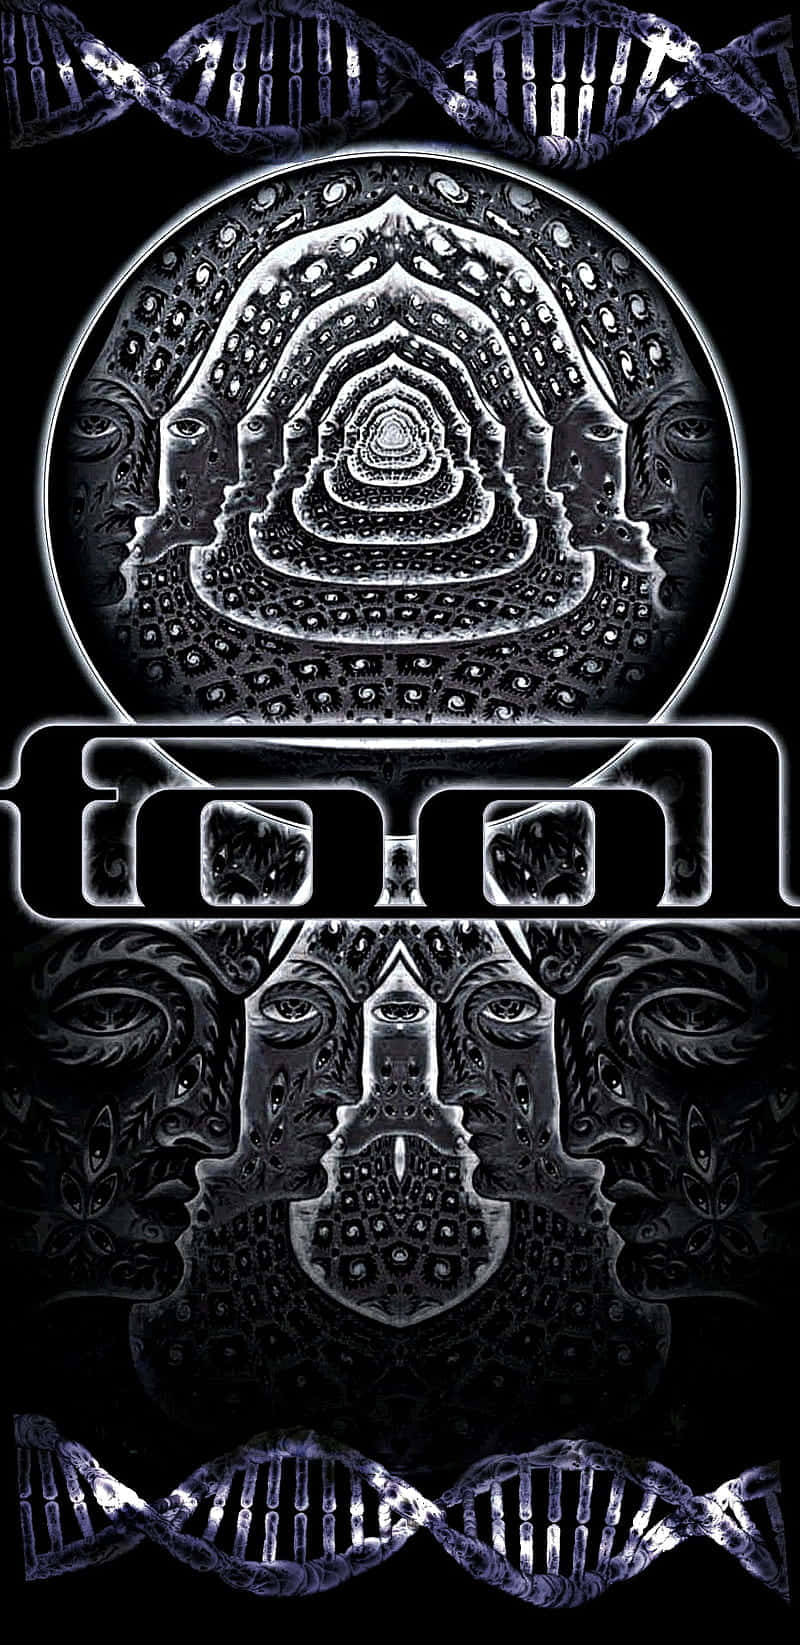 "Take in the powerful sound of Tool as they come alive on stage." Wallpaper